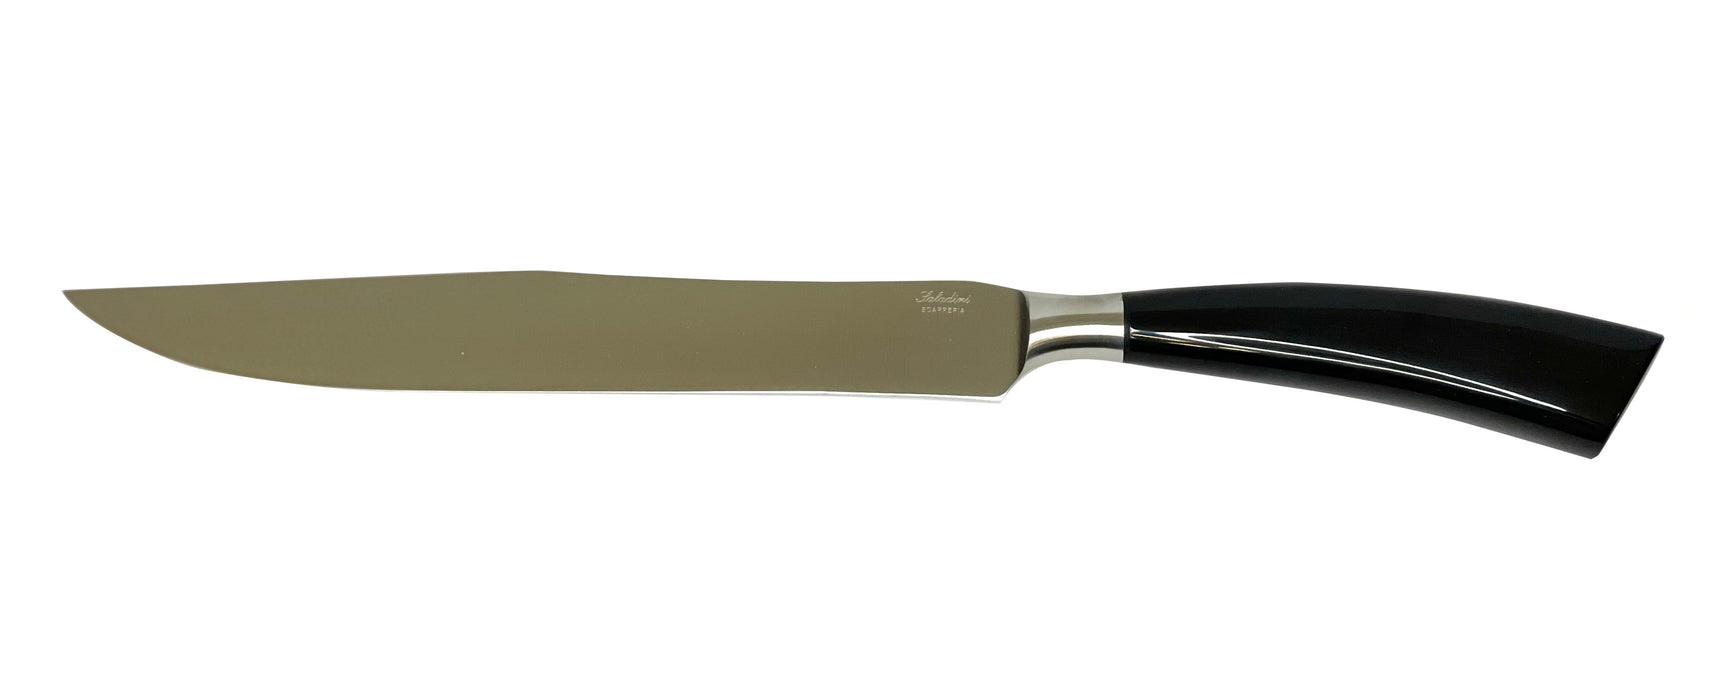 Coltelleria Saladini Stainless Steel Carving Knife with Buffalo Horn Handle, 9-Inch